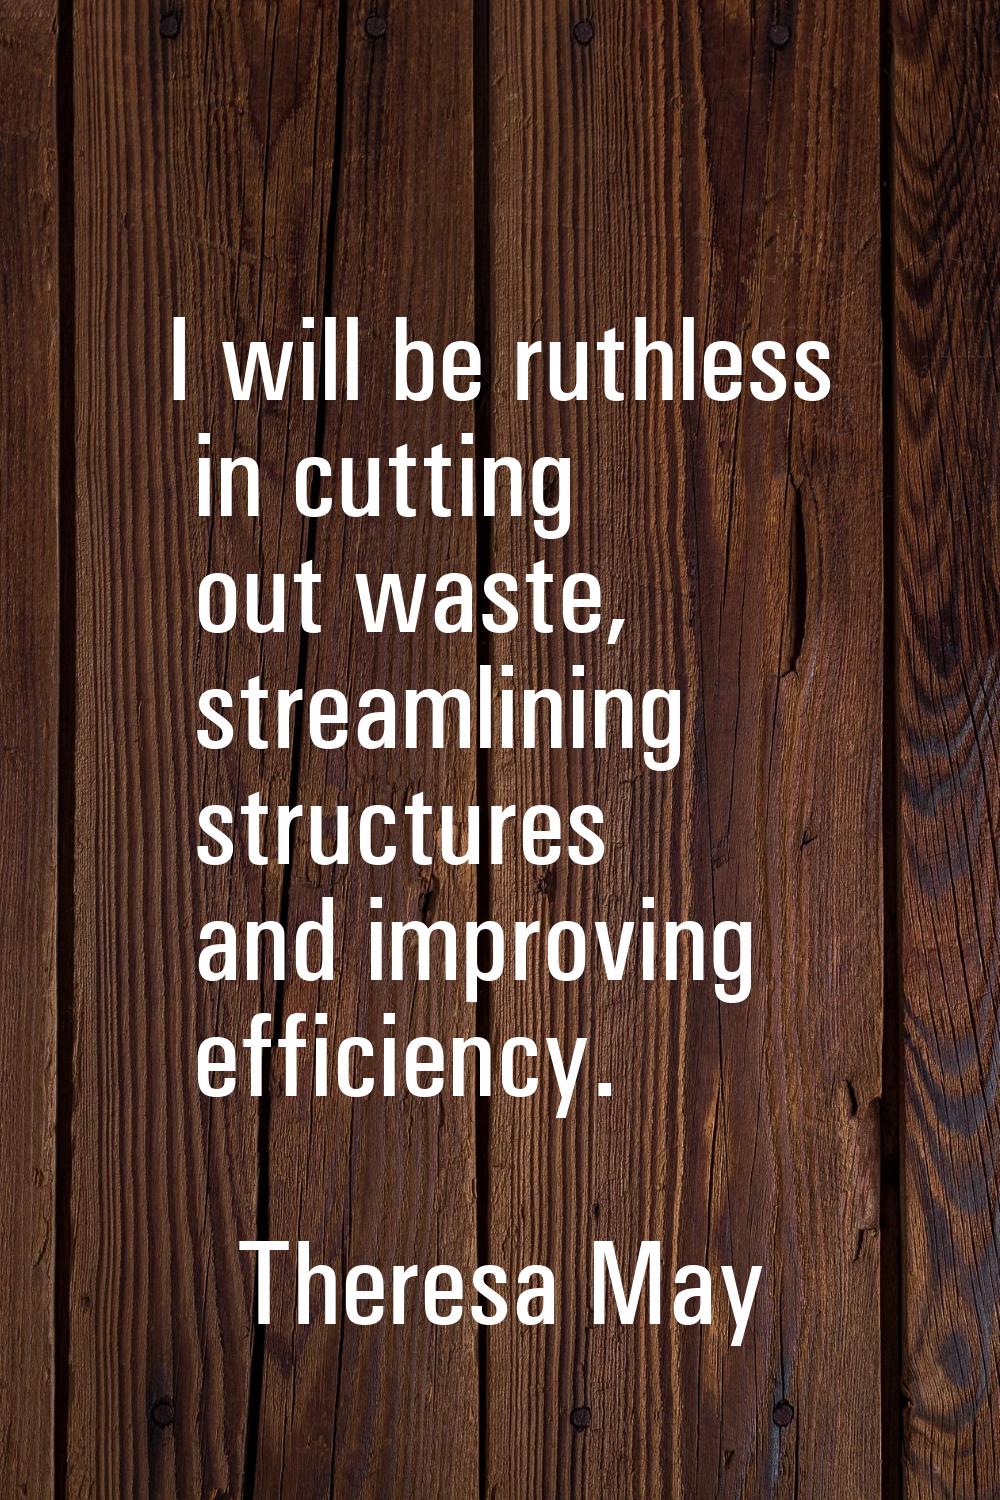 I will be ruthless in cutting out waste, streamlining structures and improving efficiency.